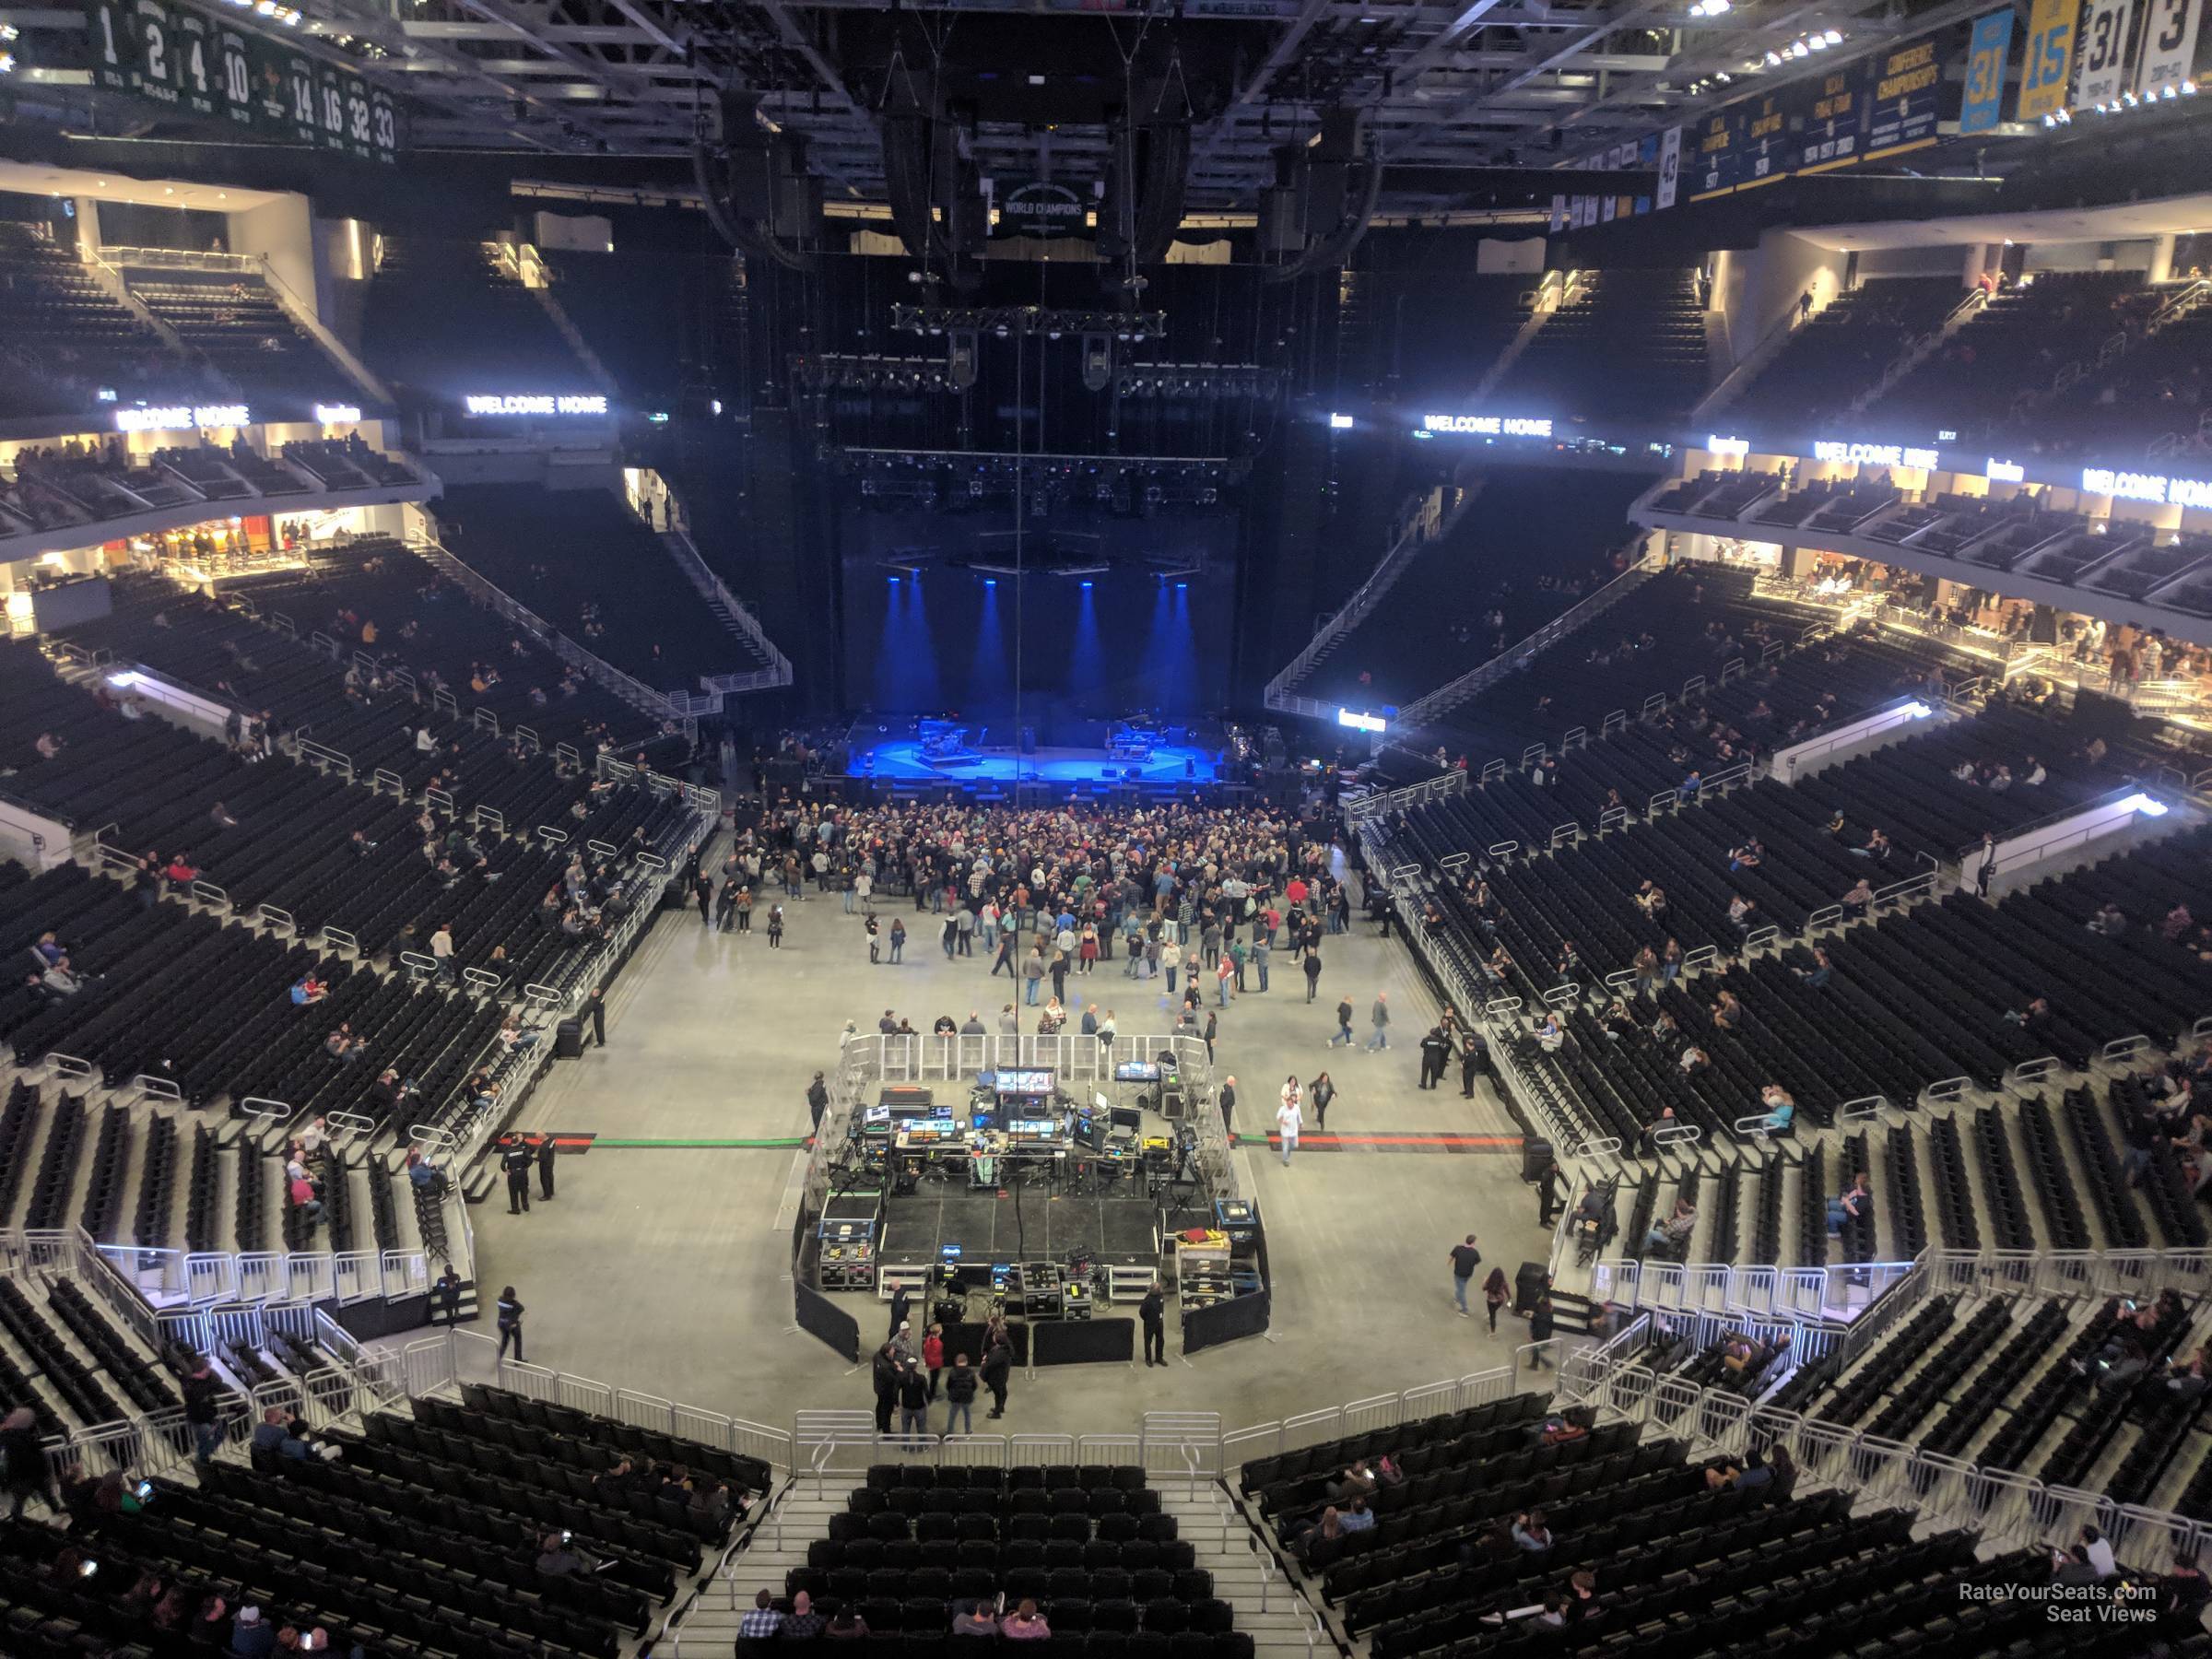 section 201, row 3 seat view  for concert - fiserv forum